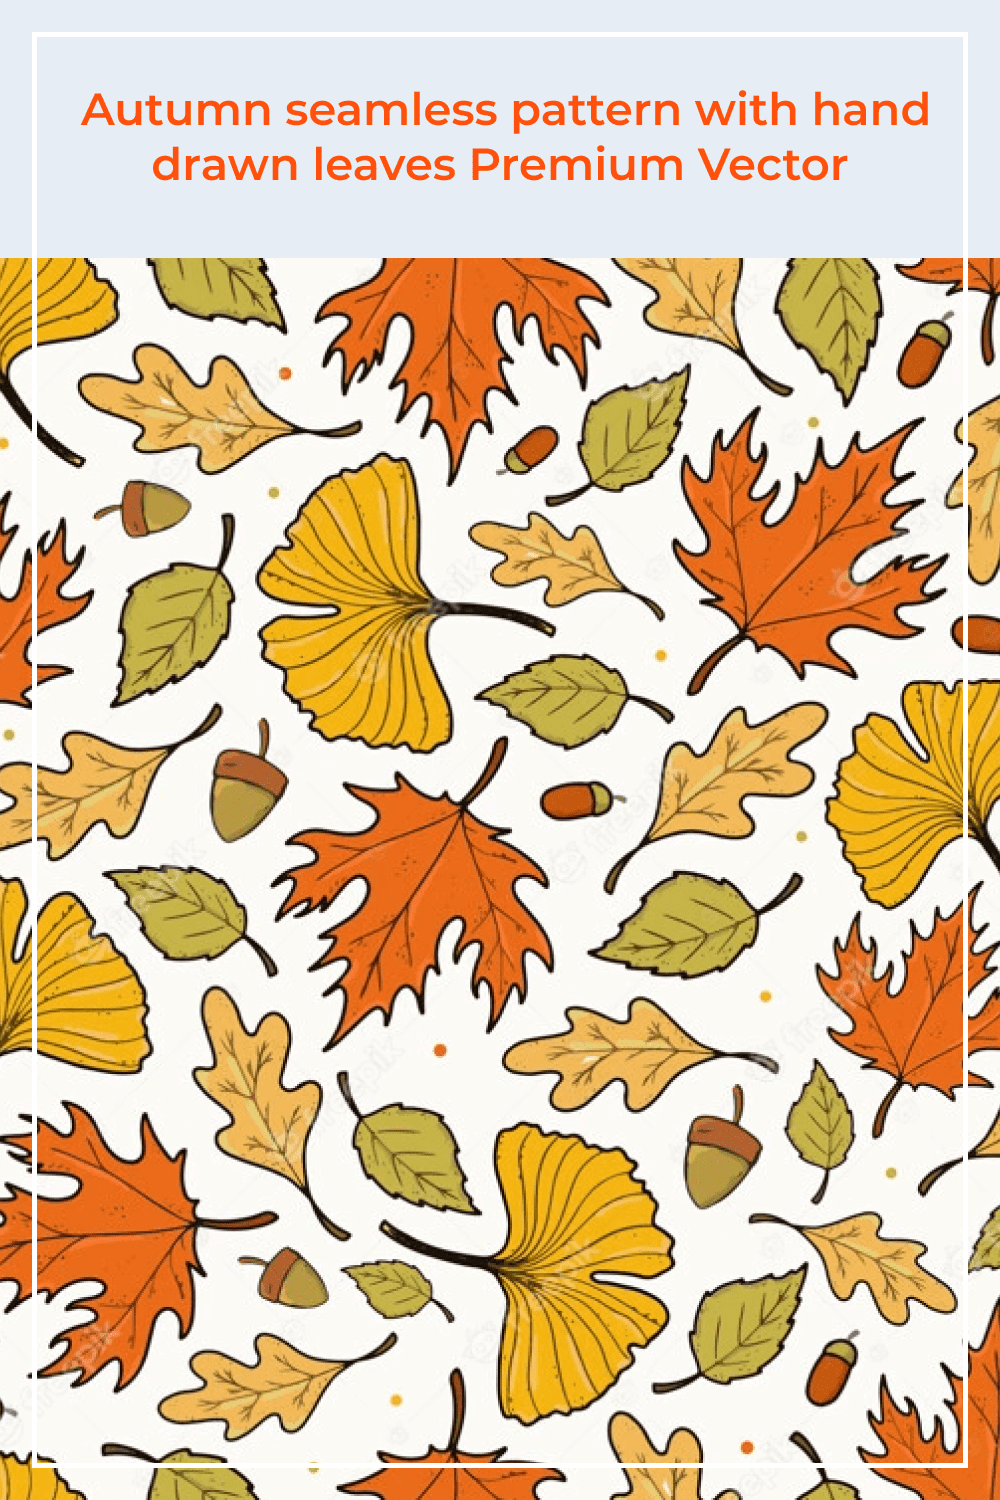 Autumn seamless pattern with hand drawn leaves Premium Vector.